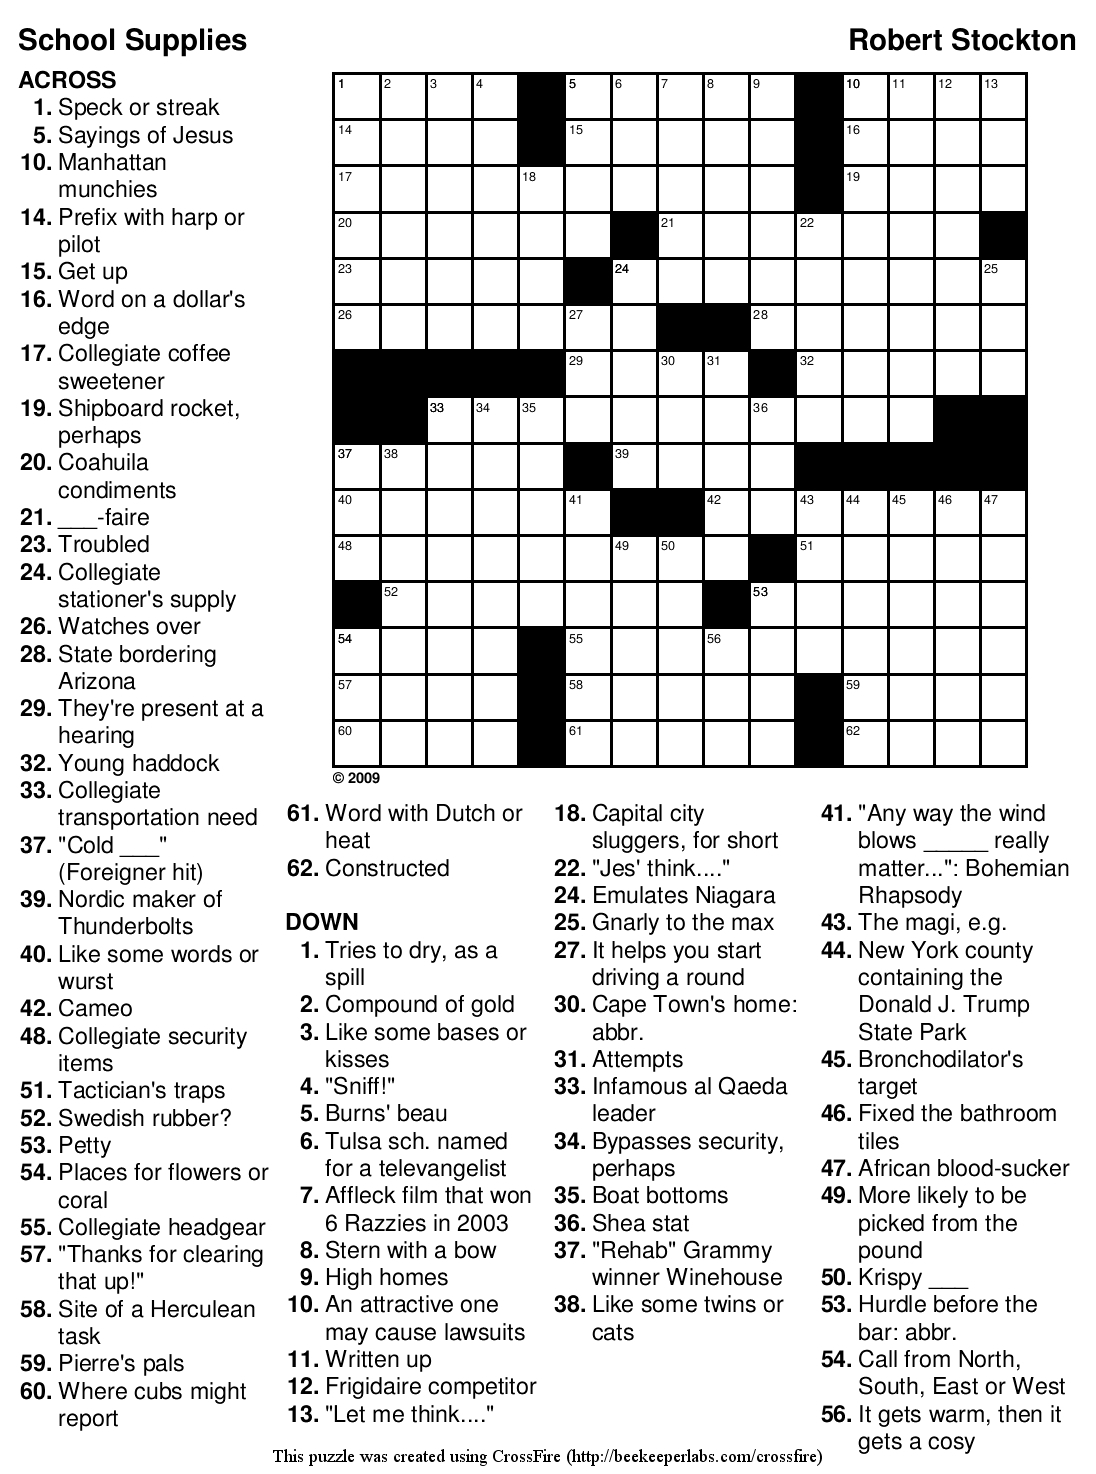 Printable Crosswords For Adults Free Printable Crossword Puzzles - Printable Crossword Puzzles For Adults Hard